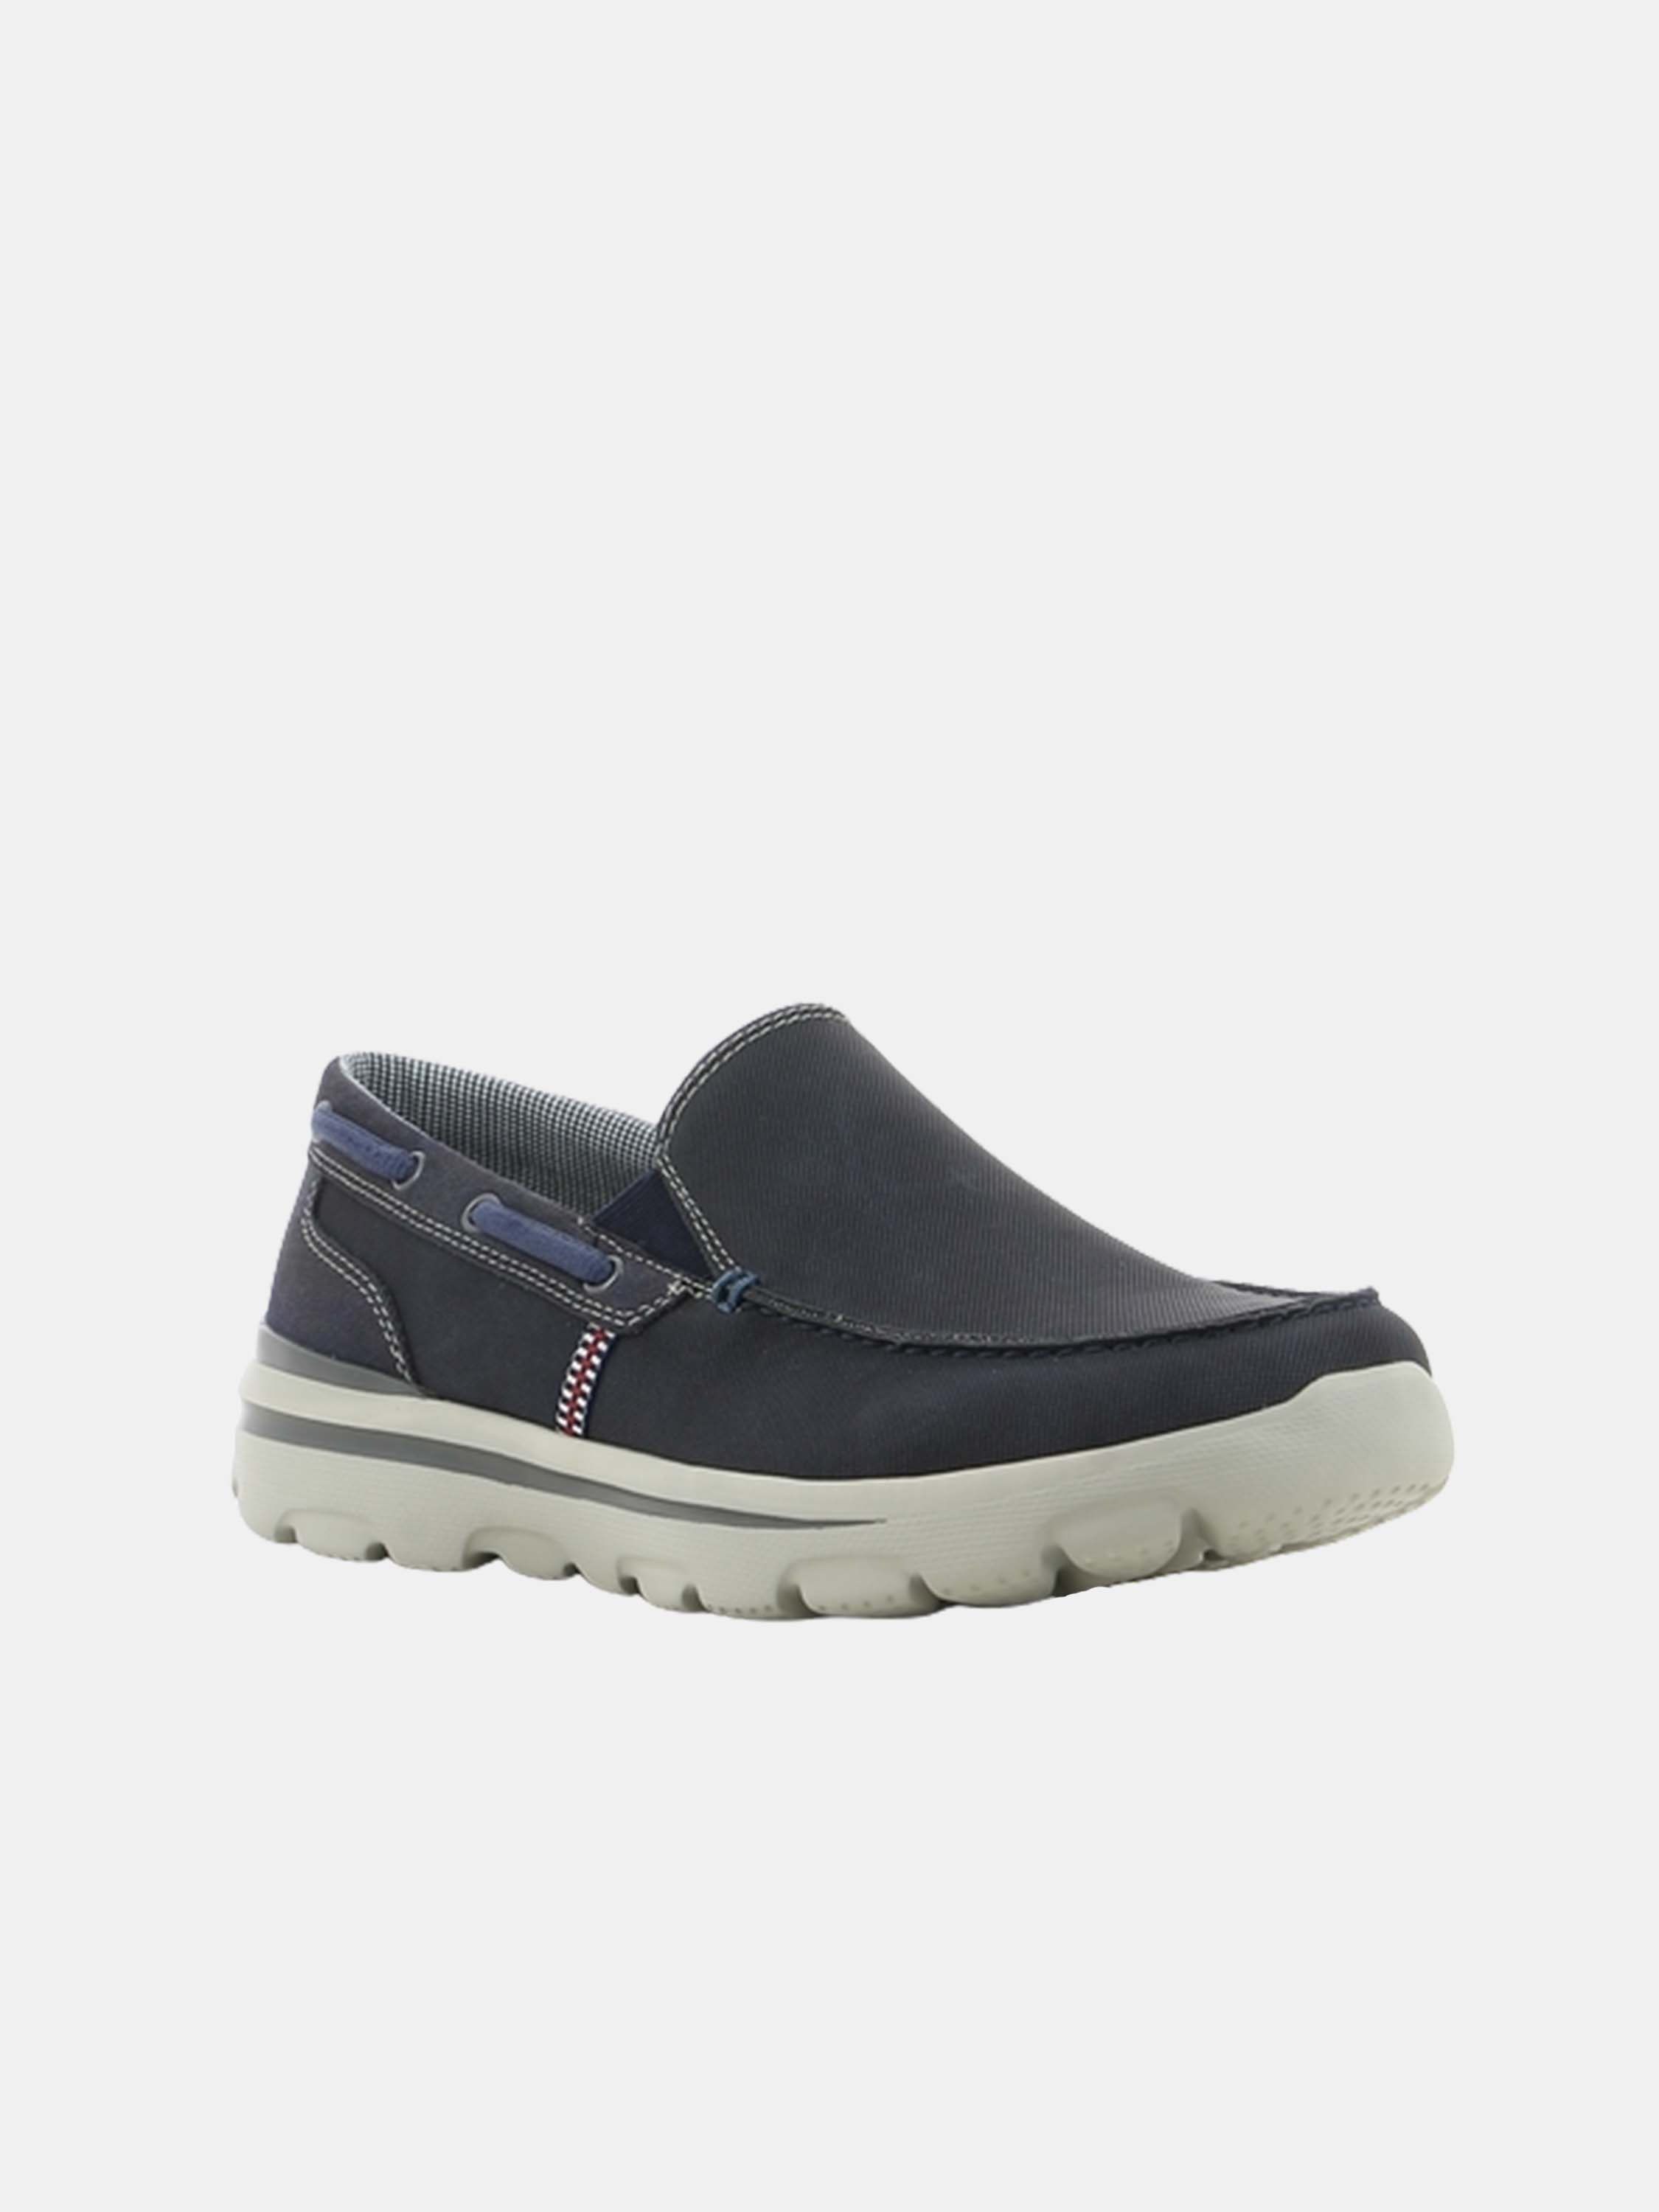 Sprox Men's Navy Slip On Shoes #color_Navy